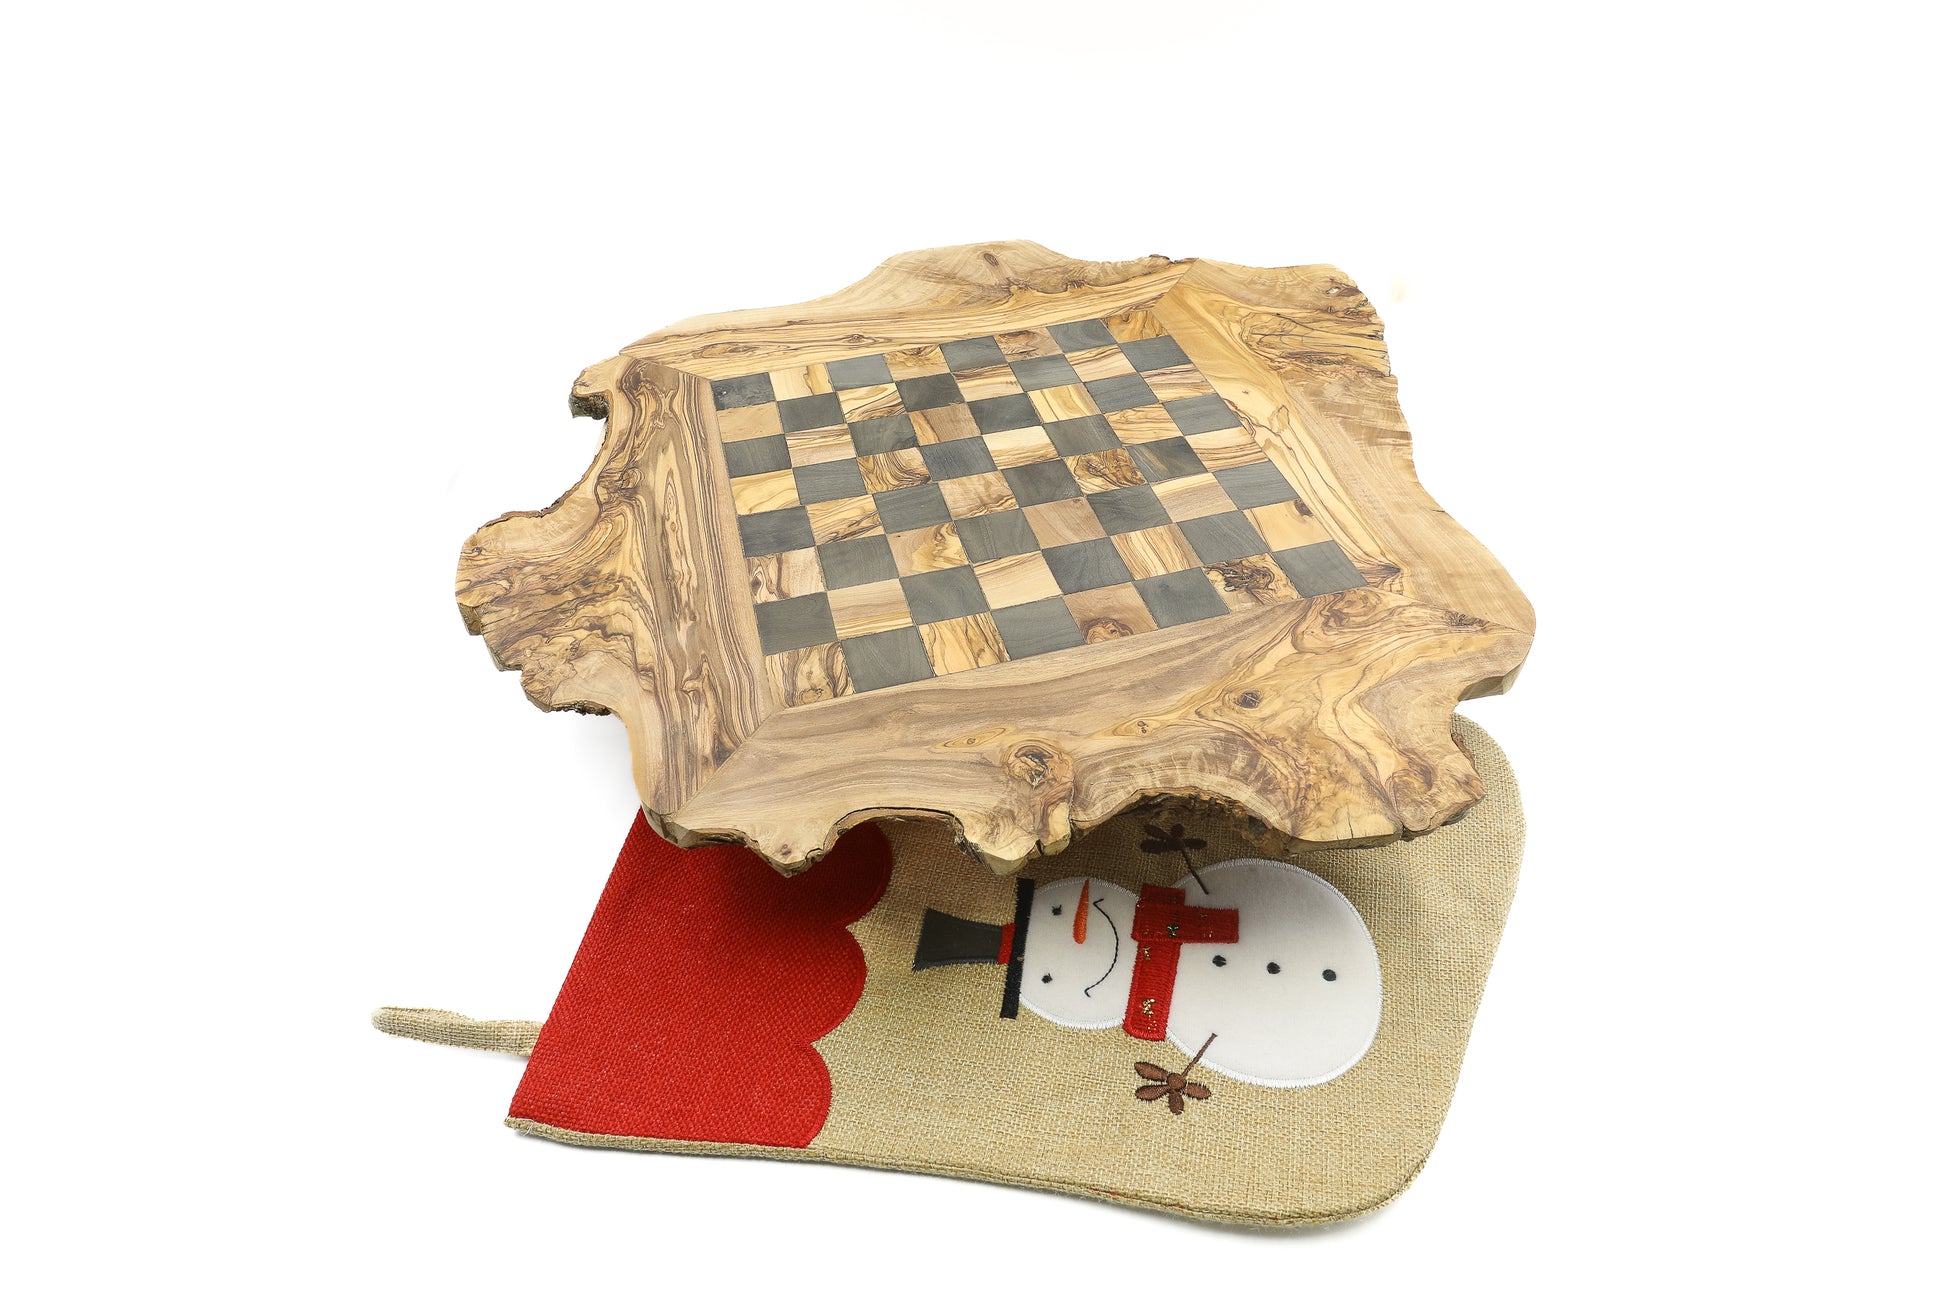 Classic Chess Set: Elegant Olive Wood Board with Matching Pieces